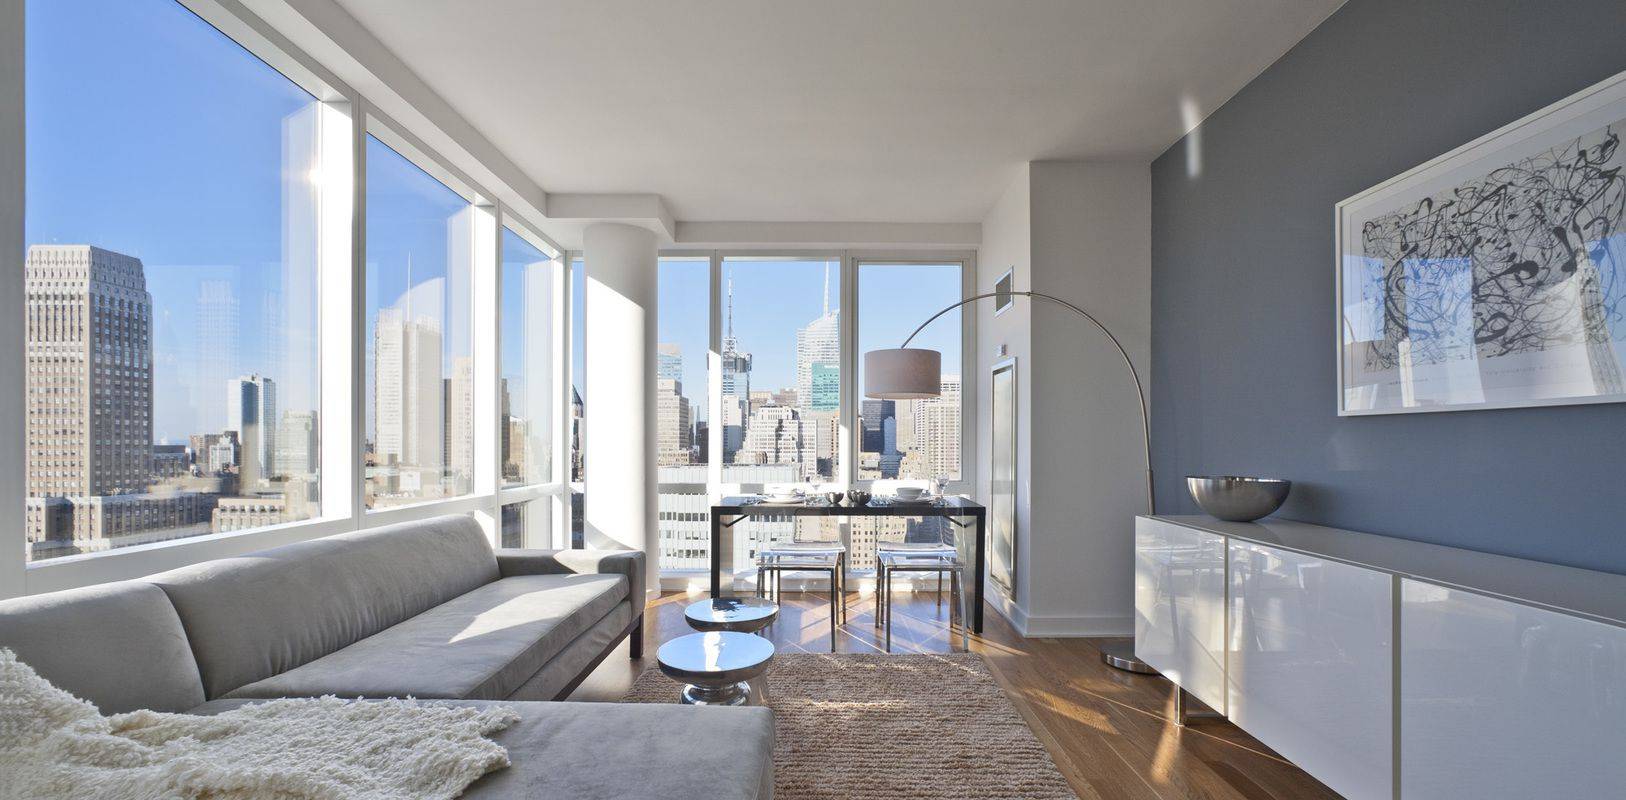 No Fee! This amazing north and west corner one bedroom with a home office located in Midtown South.